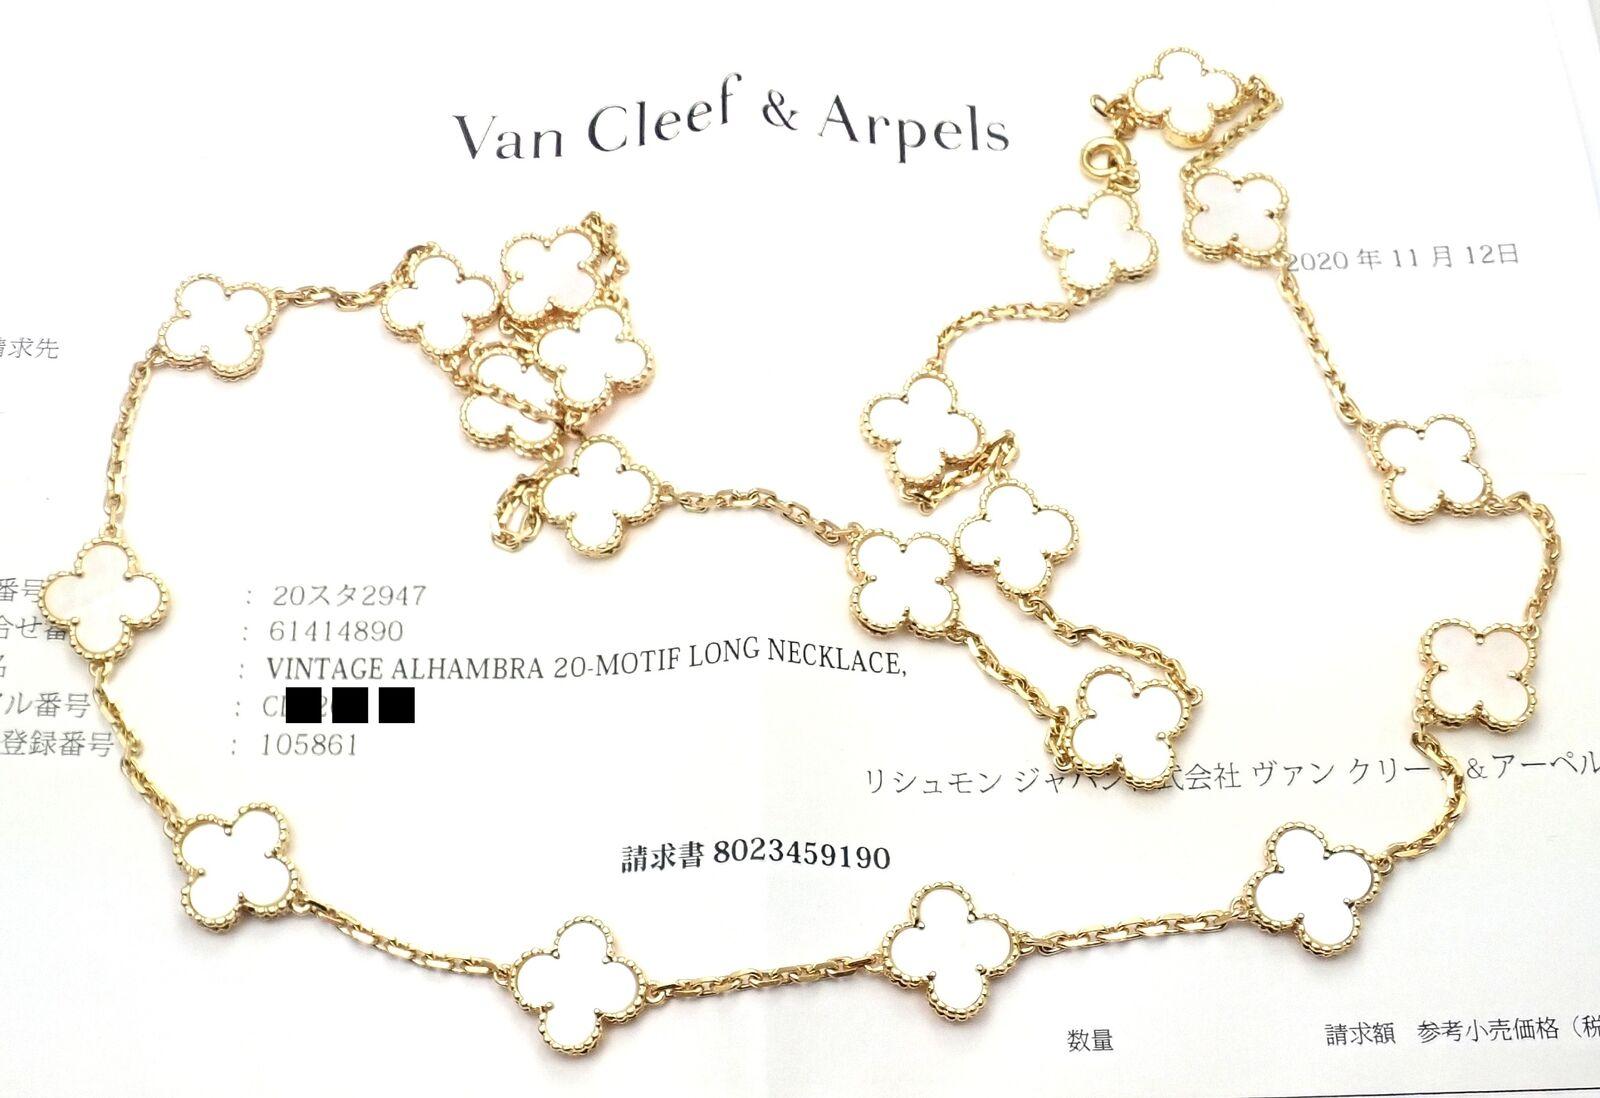 18k Yellow Gold Alhambra 20 Motifs Mother Of Pearl Necklace by Van Cleef & Arpels. 
With 20 motifs of mother of pearl Alhambra stones 15mm each.
This necklace comes with service paper from Van Cleef & Arpels store.
Details: 
Length: 32.5'' 
Width: